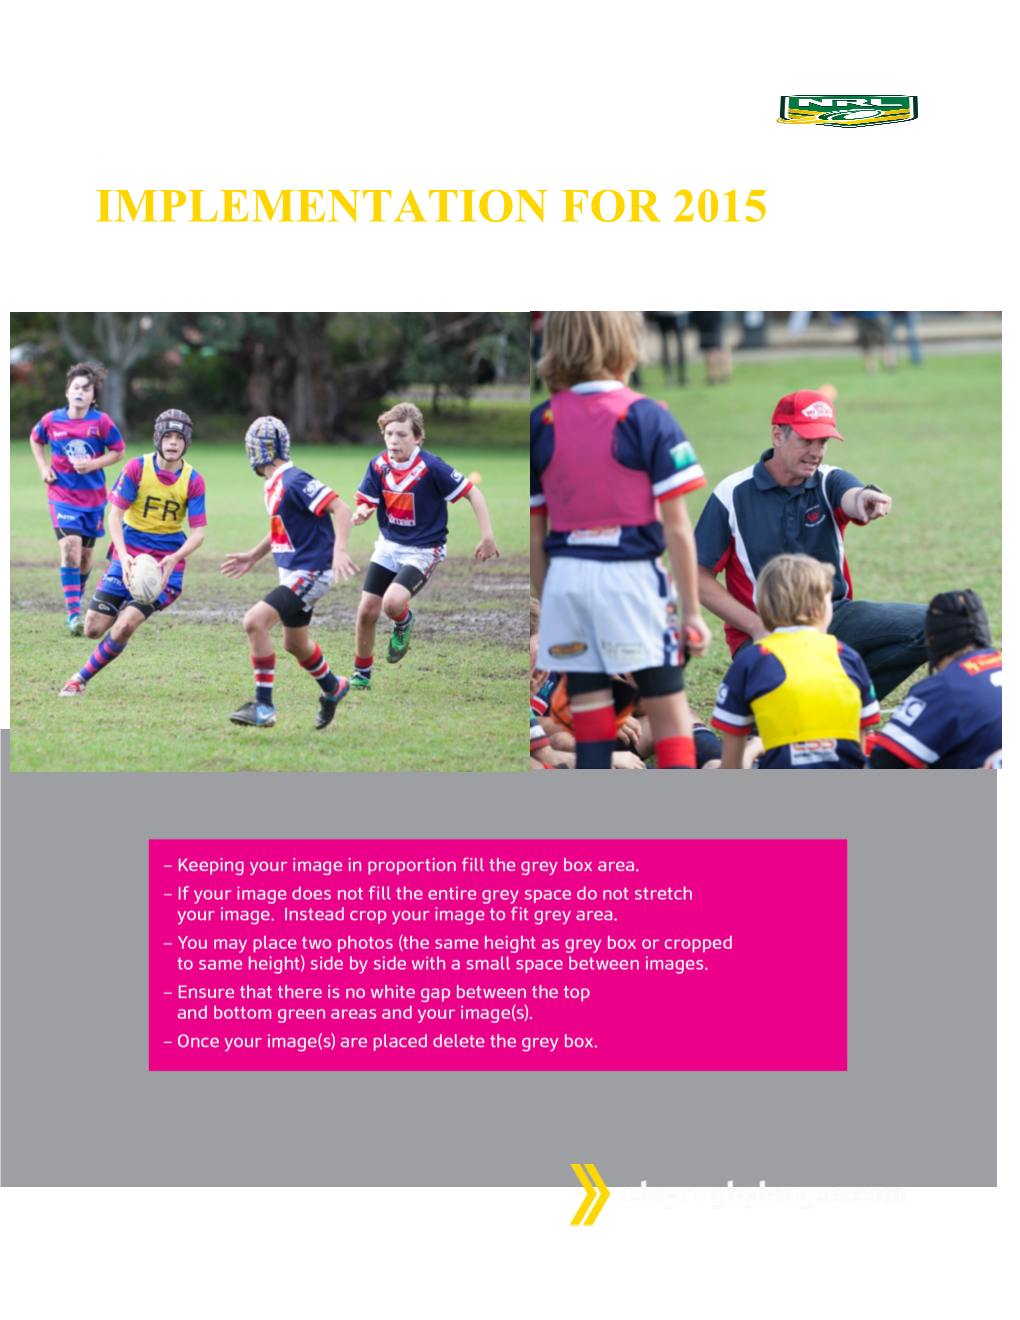 Law Changes for 2015: Mini FOOTY & MOD LEAGUE